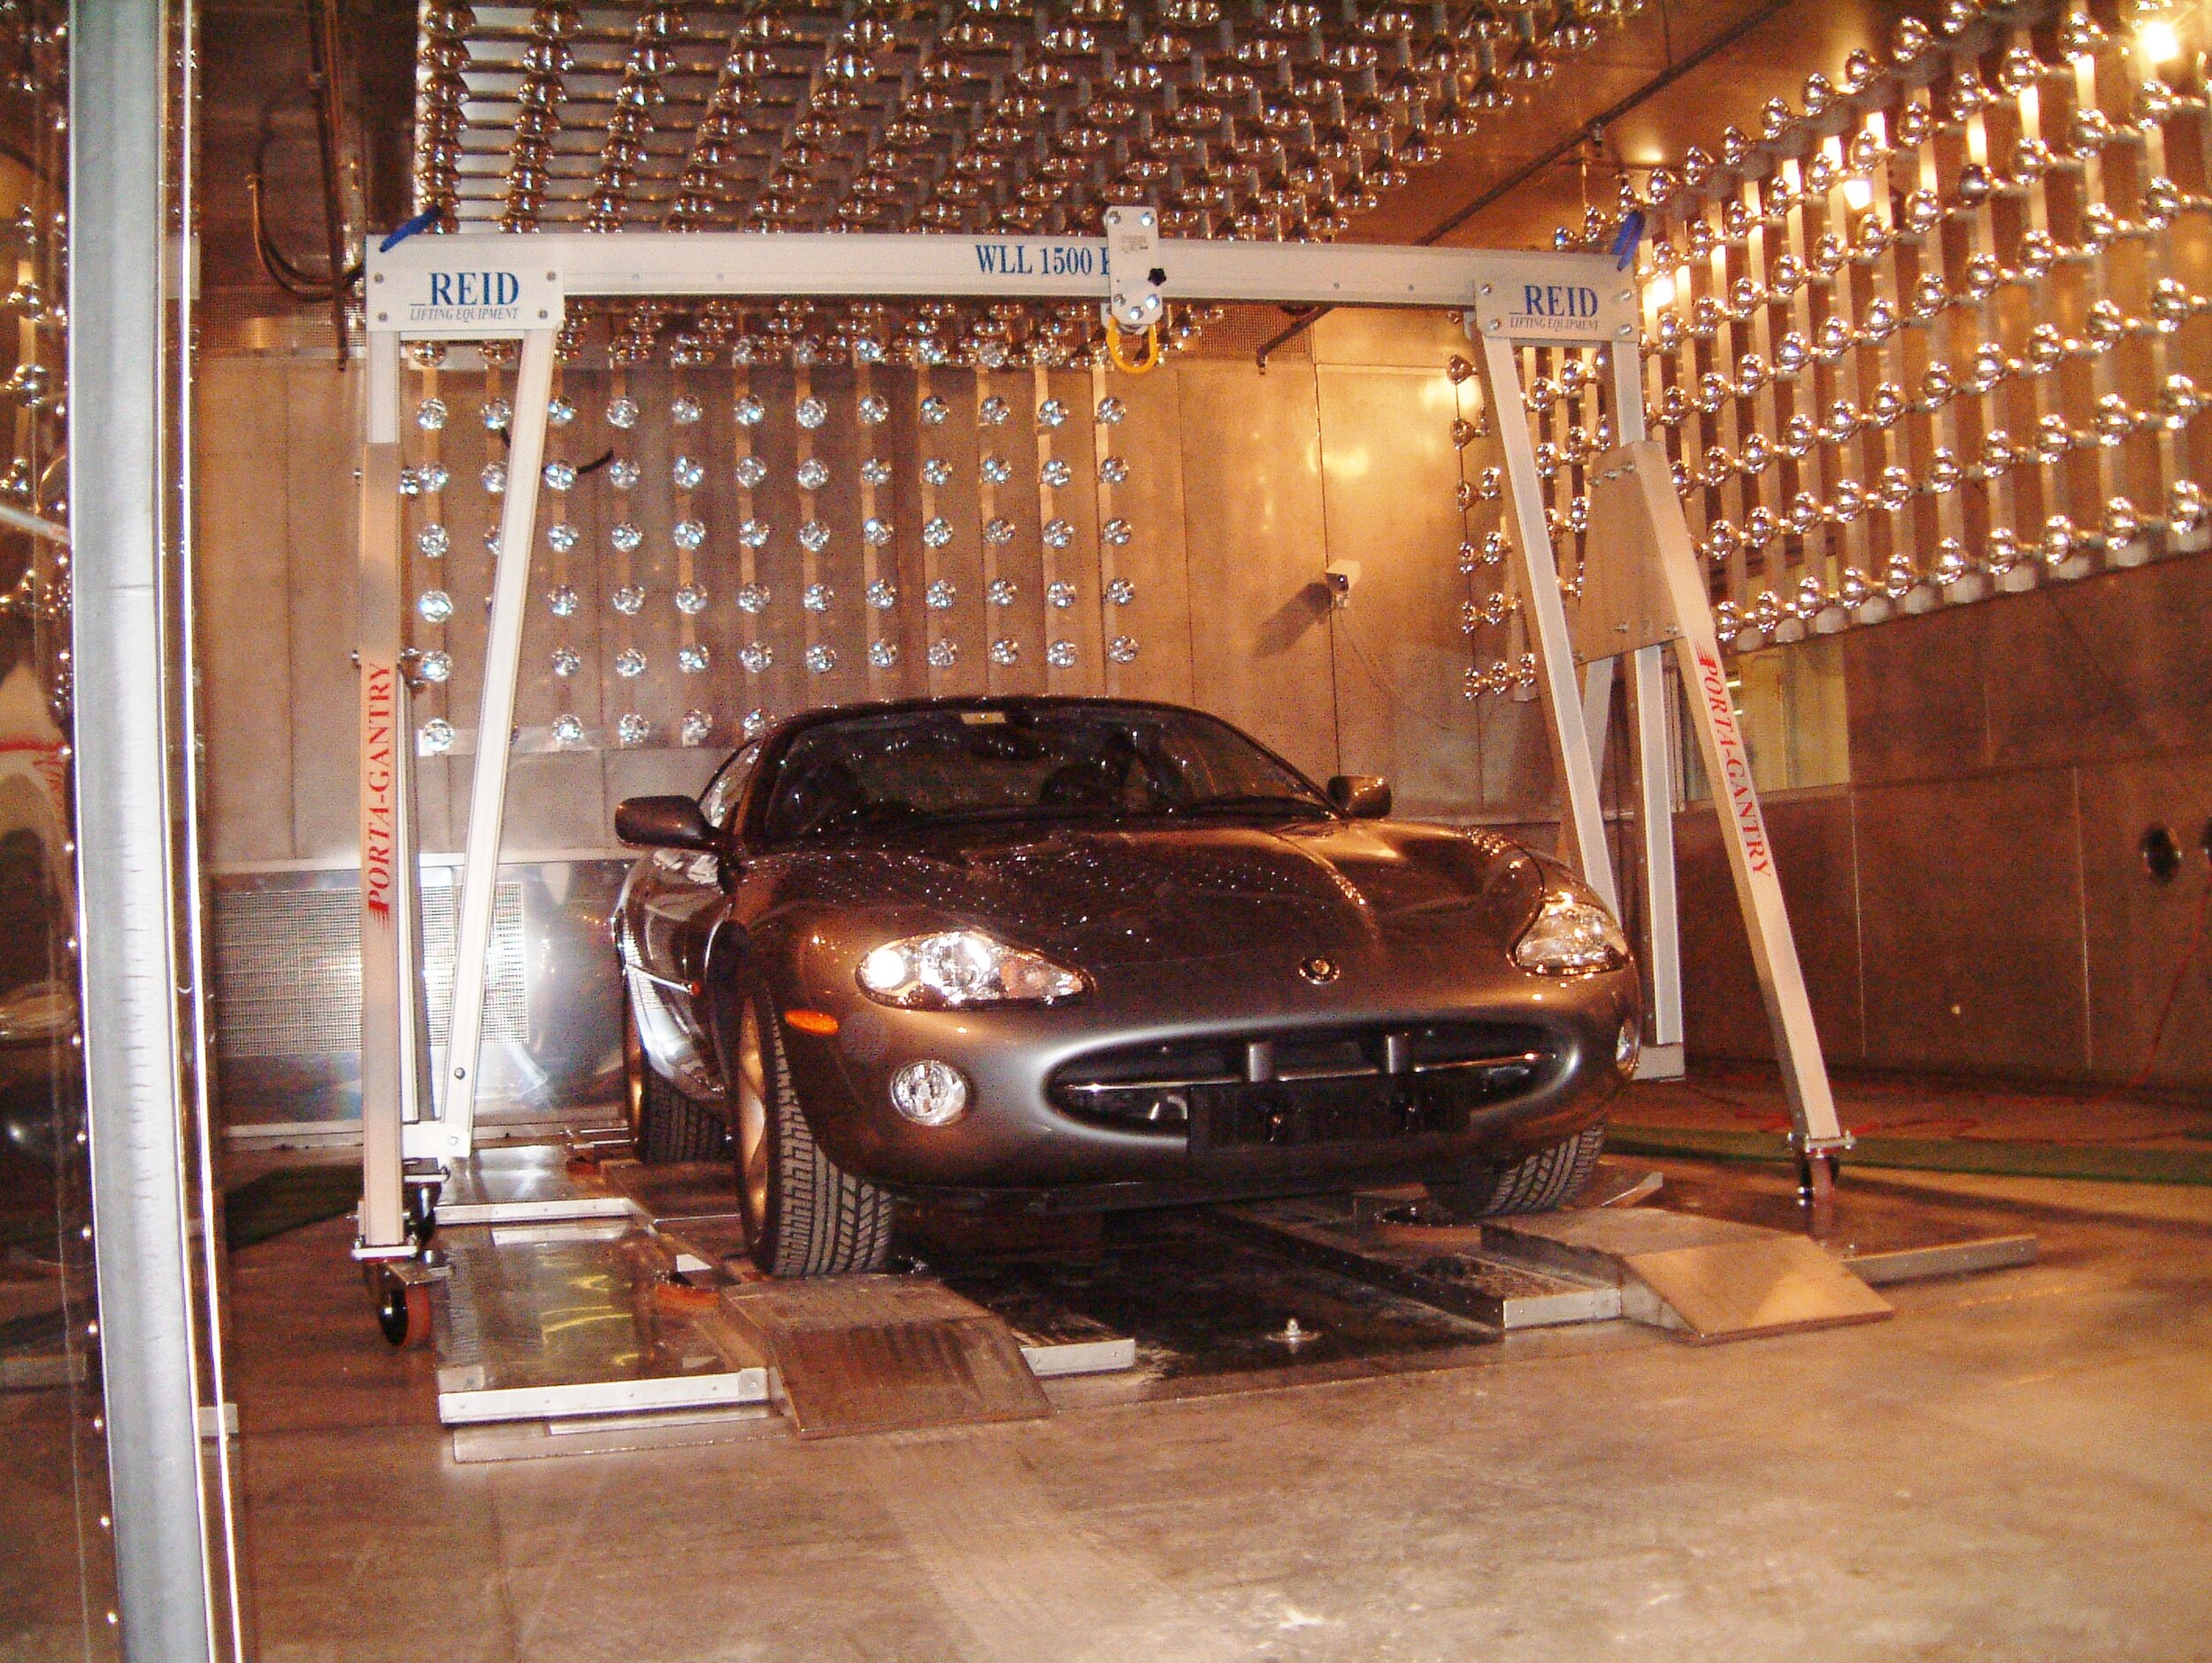 Porta Gantry being used in the automotive industry at Jaguar